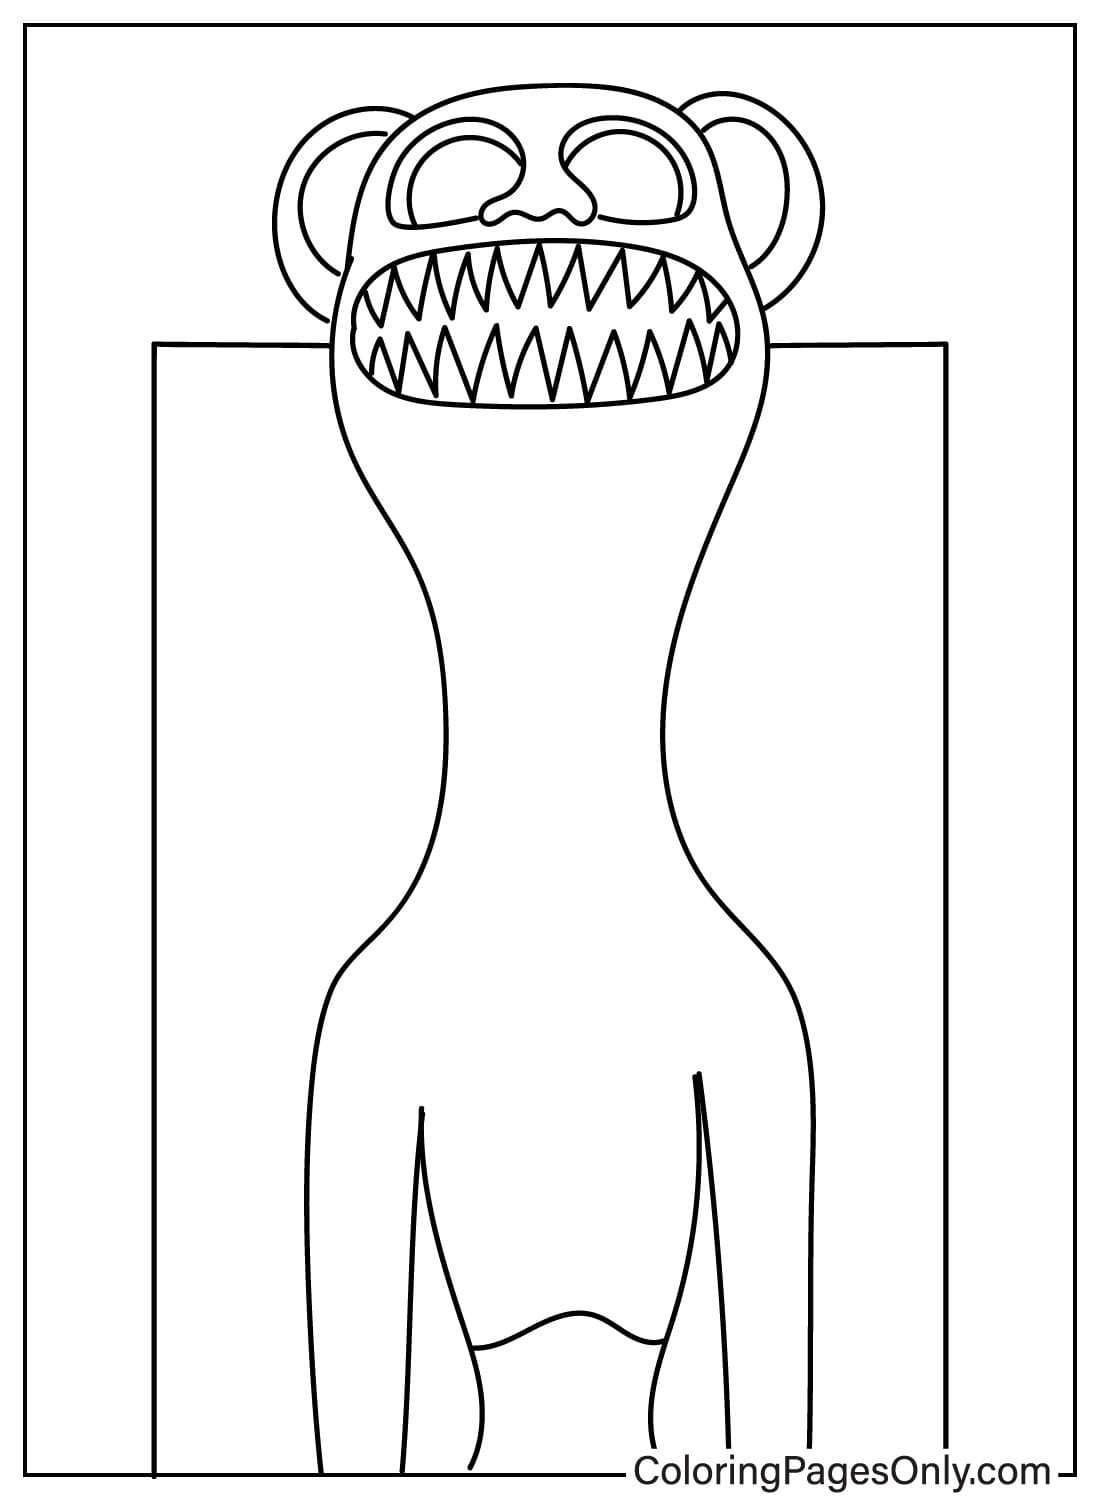 Zoonomaly Coloring Page for Preschoolers - Free Printable Coloring Pages